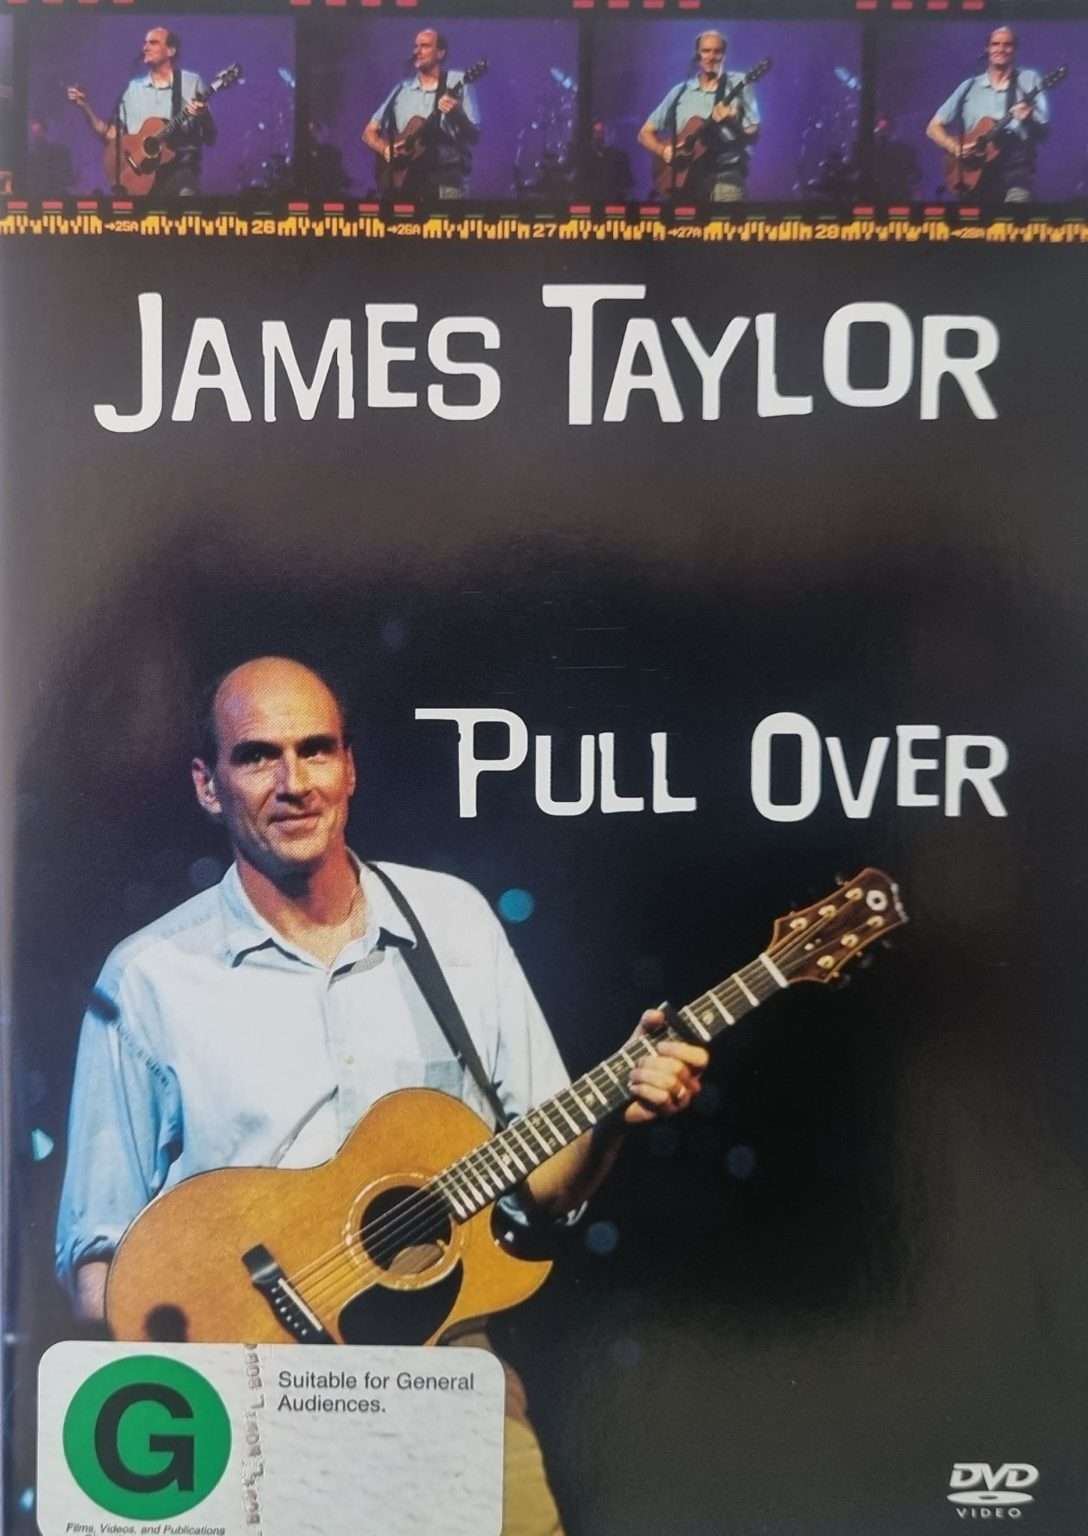 James Taylor - Pull Over (Live in 2001)